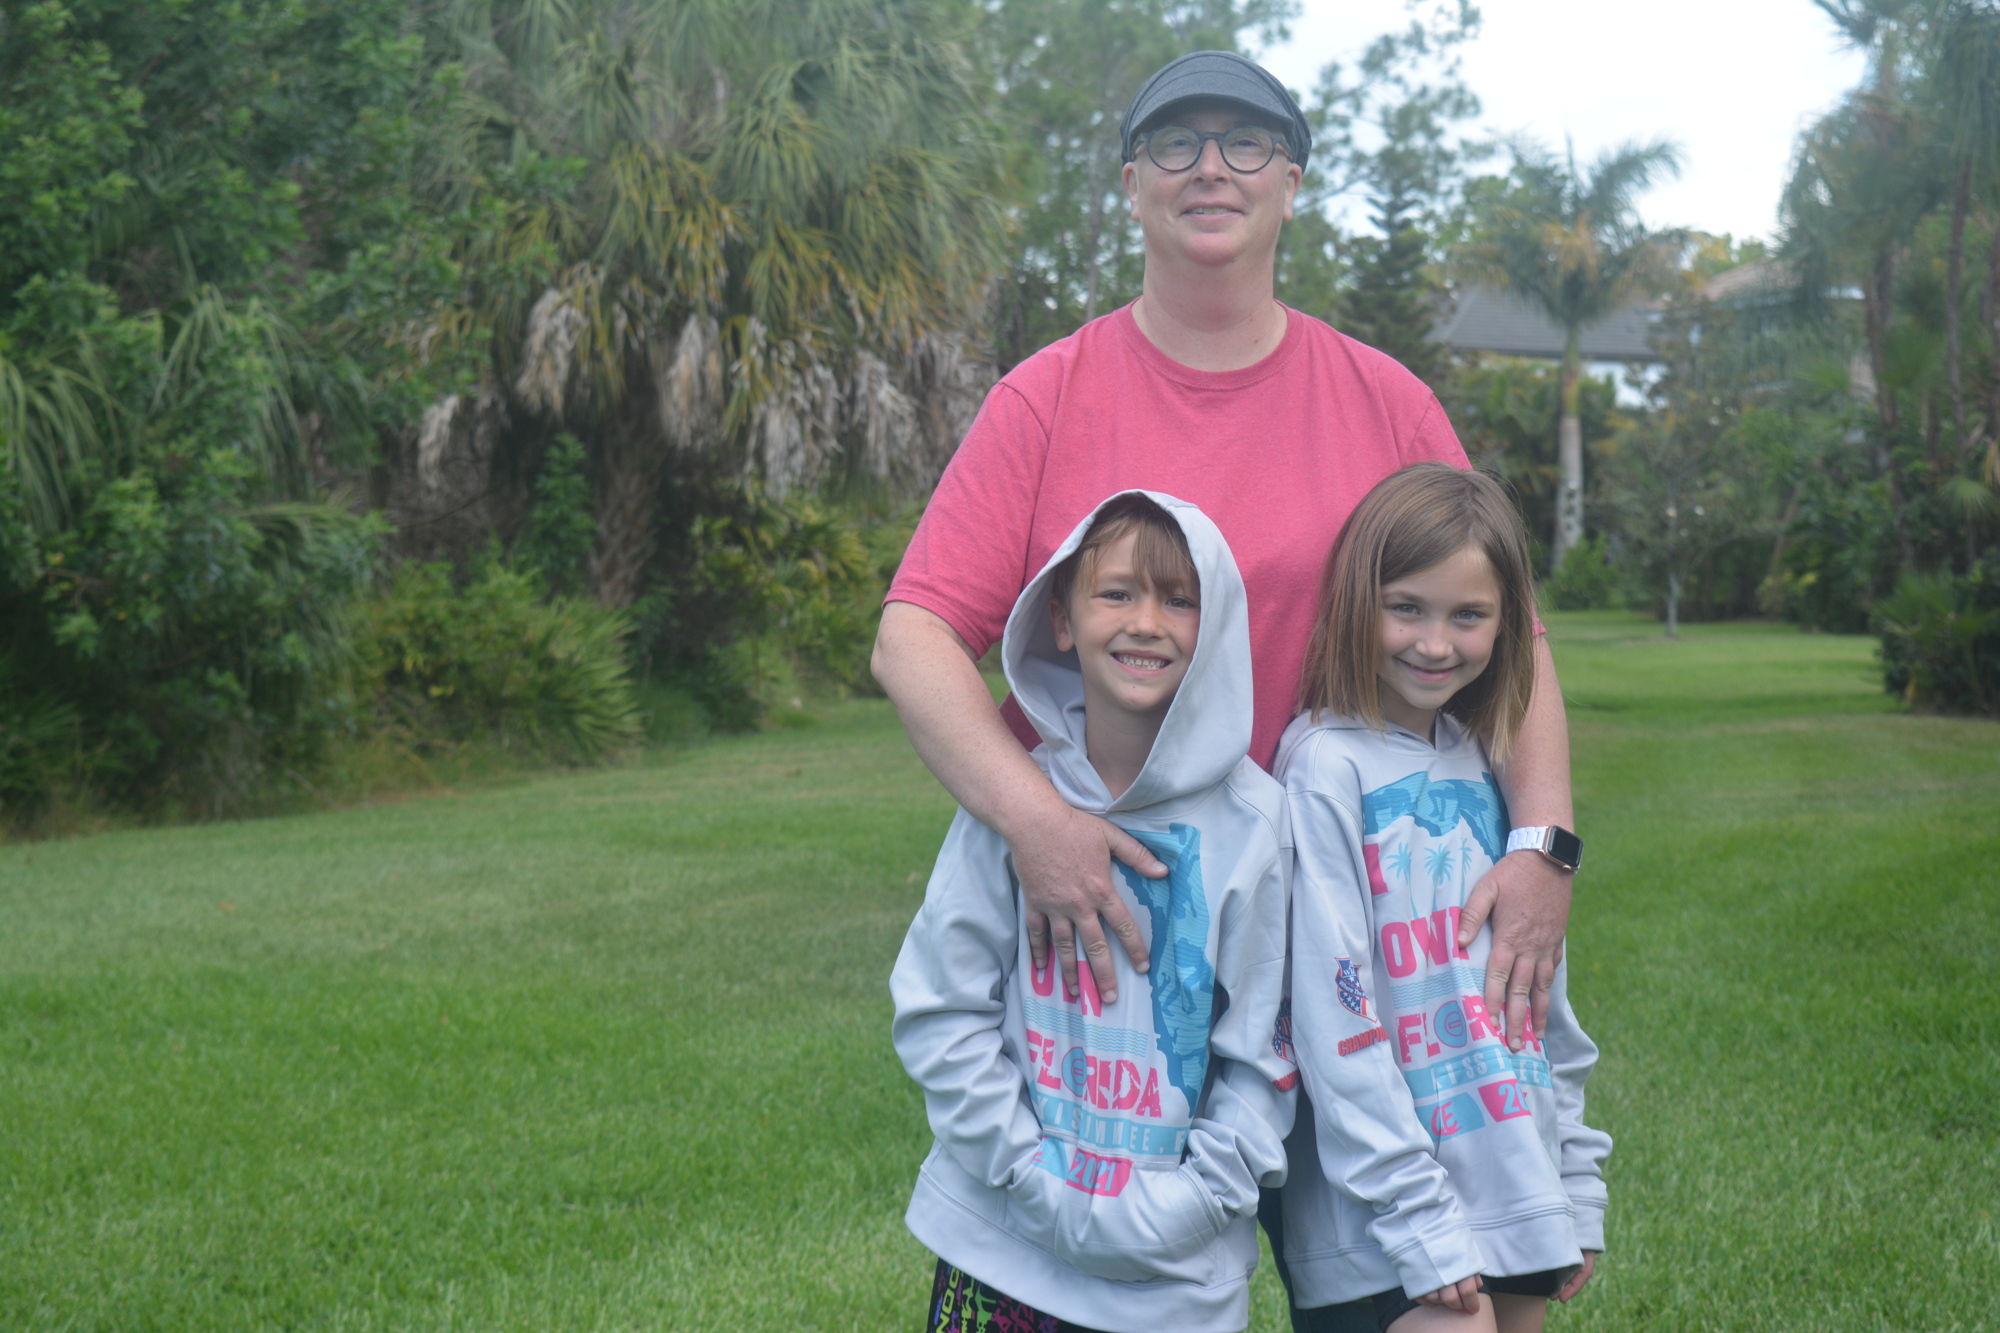 Christin Perkinson (middle) has stayed strong through her breast cancer diagnosis thanks to the supports of her kids, Ellie Perkinson and Isaac Perkinson. Isaac is raising money for the Pin Cancer Nationals wrestling tournament.